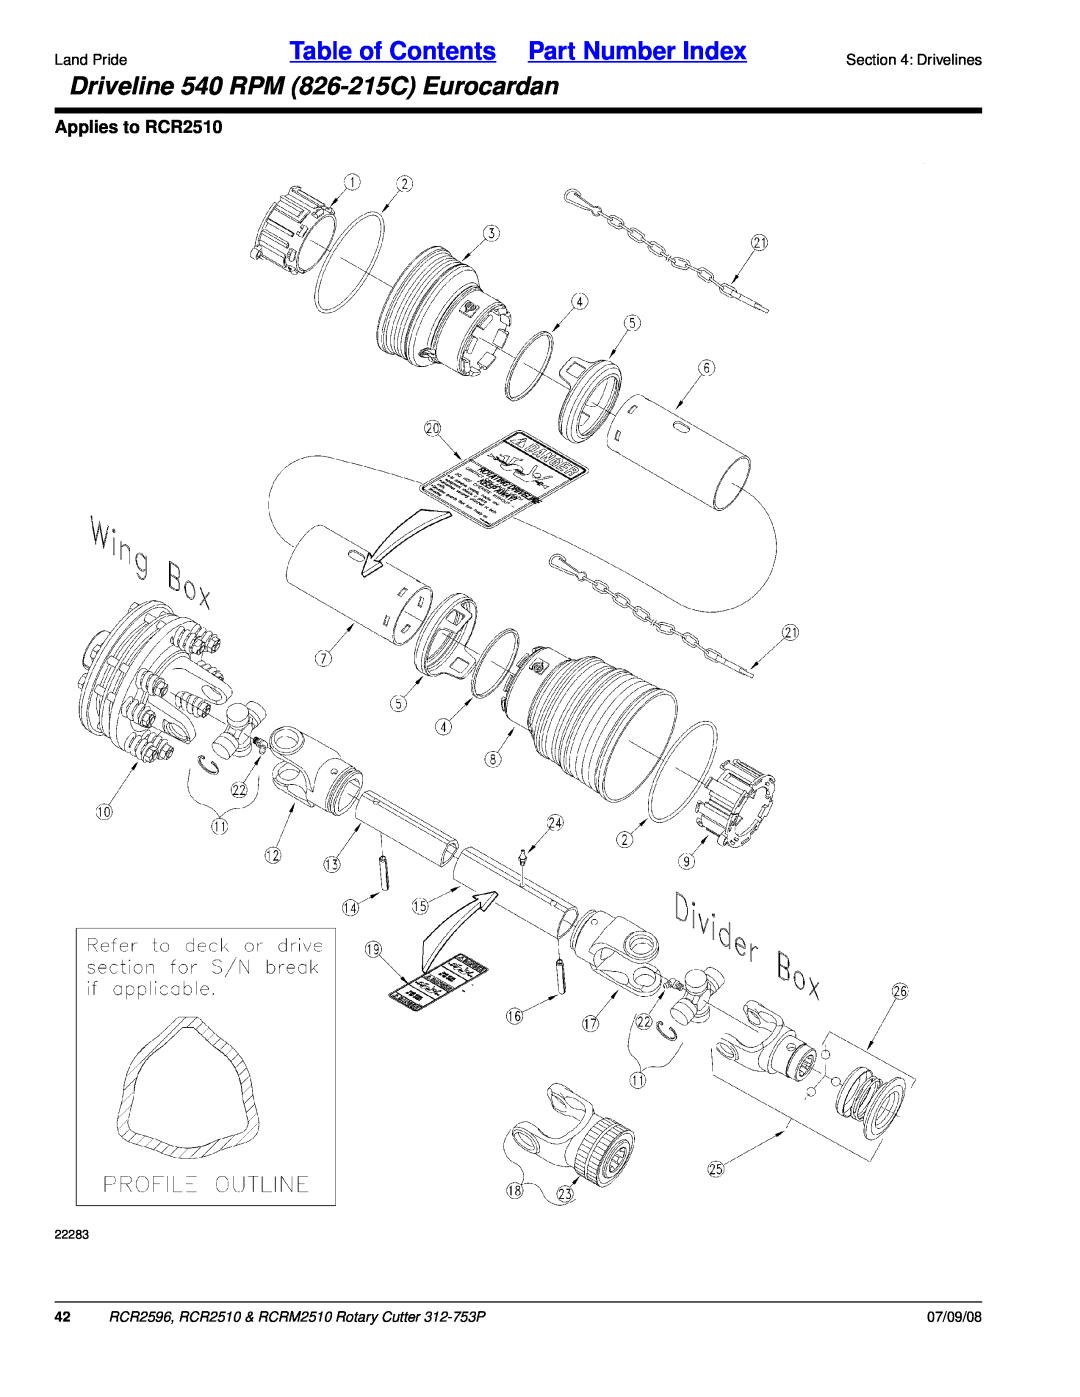 Land Pride RCR2596 Driveline 540 RPM 826-215CEurocardan, Applies to RCR2510, Table of Contents Part Number Index, 07/09/08 